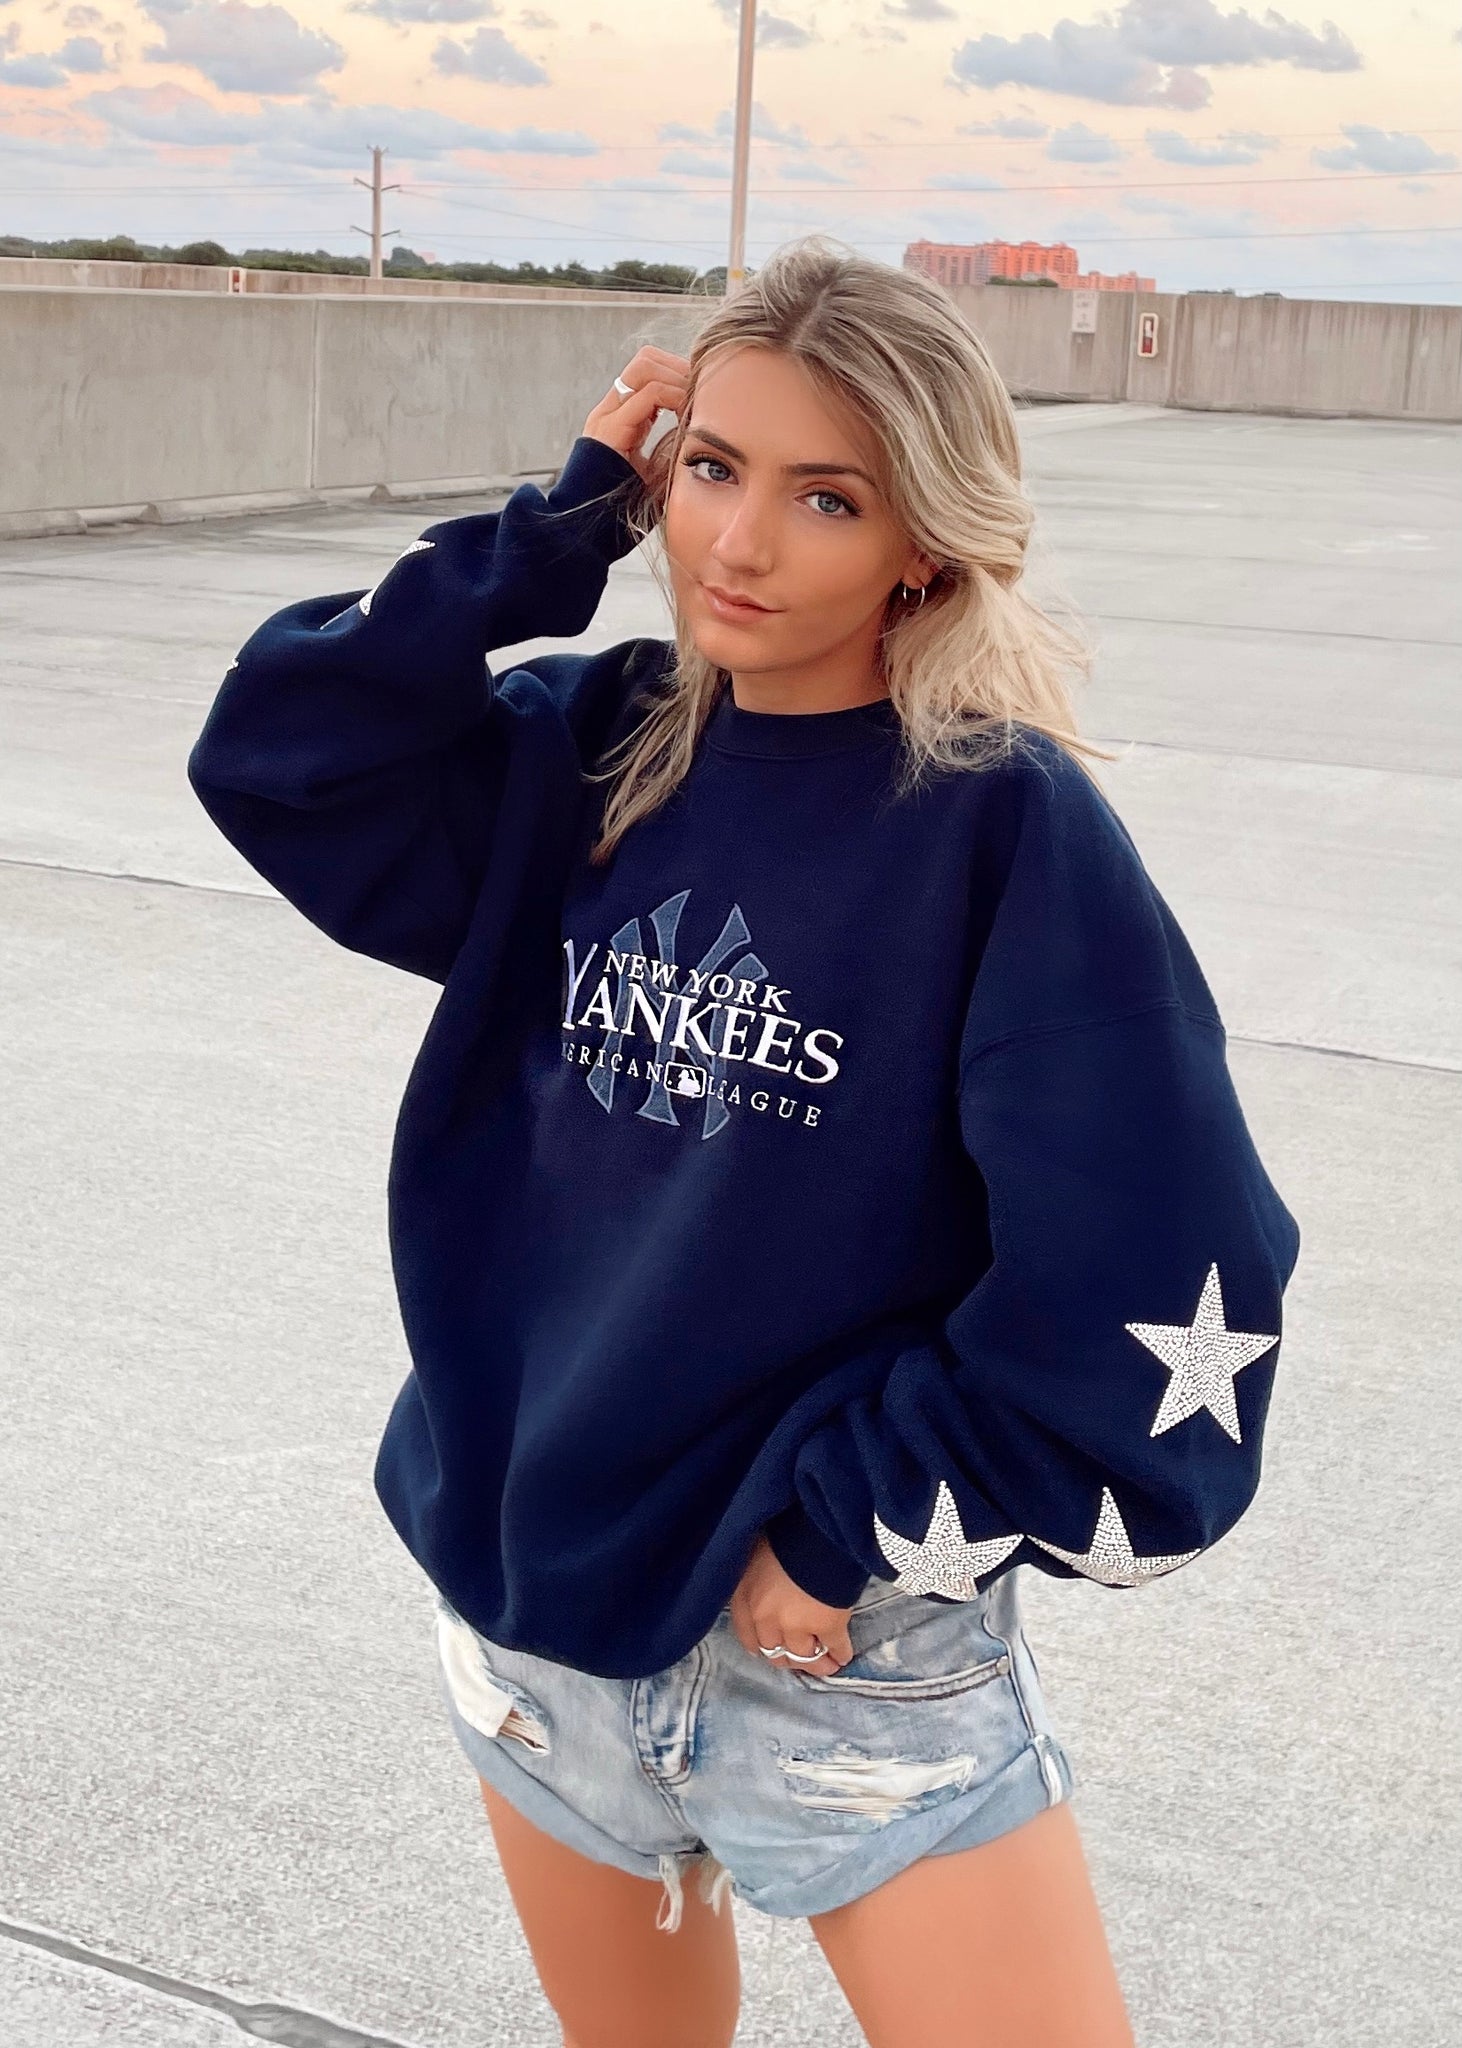 ShopCrystalRags NY Yankees, MLB One of A Kind Vintage Sweatshirt with Overall Swarovski Crystals on The Sleeves